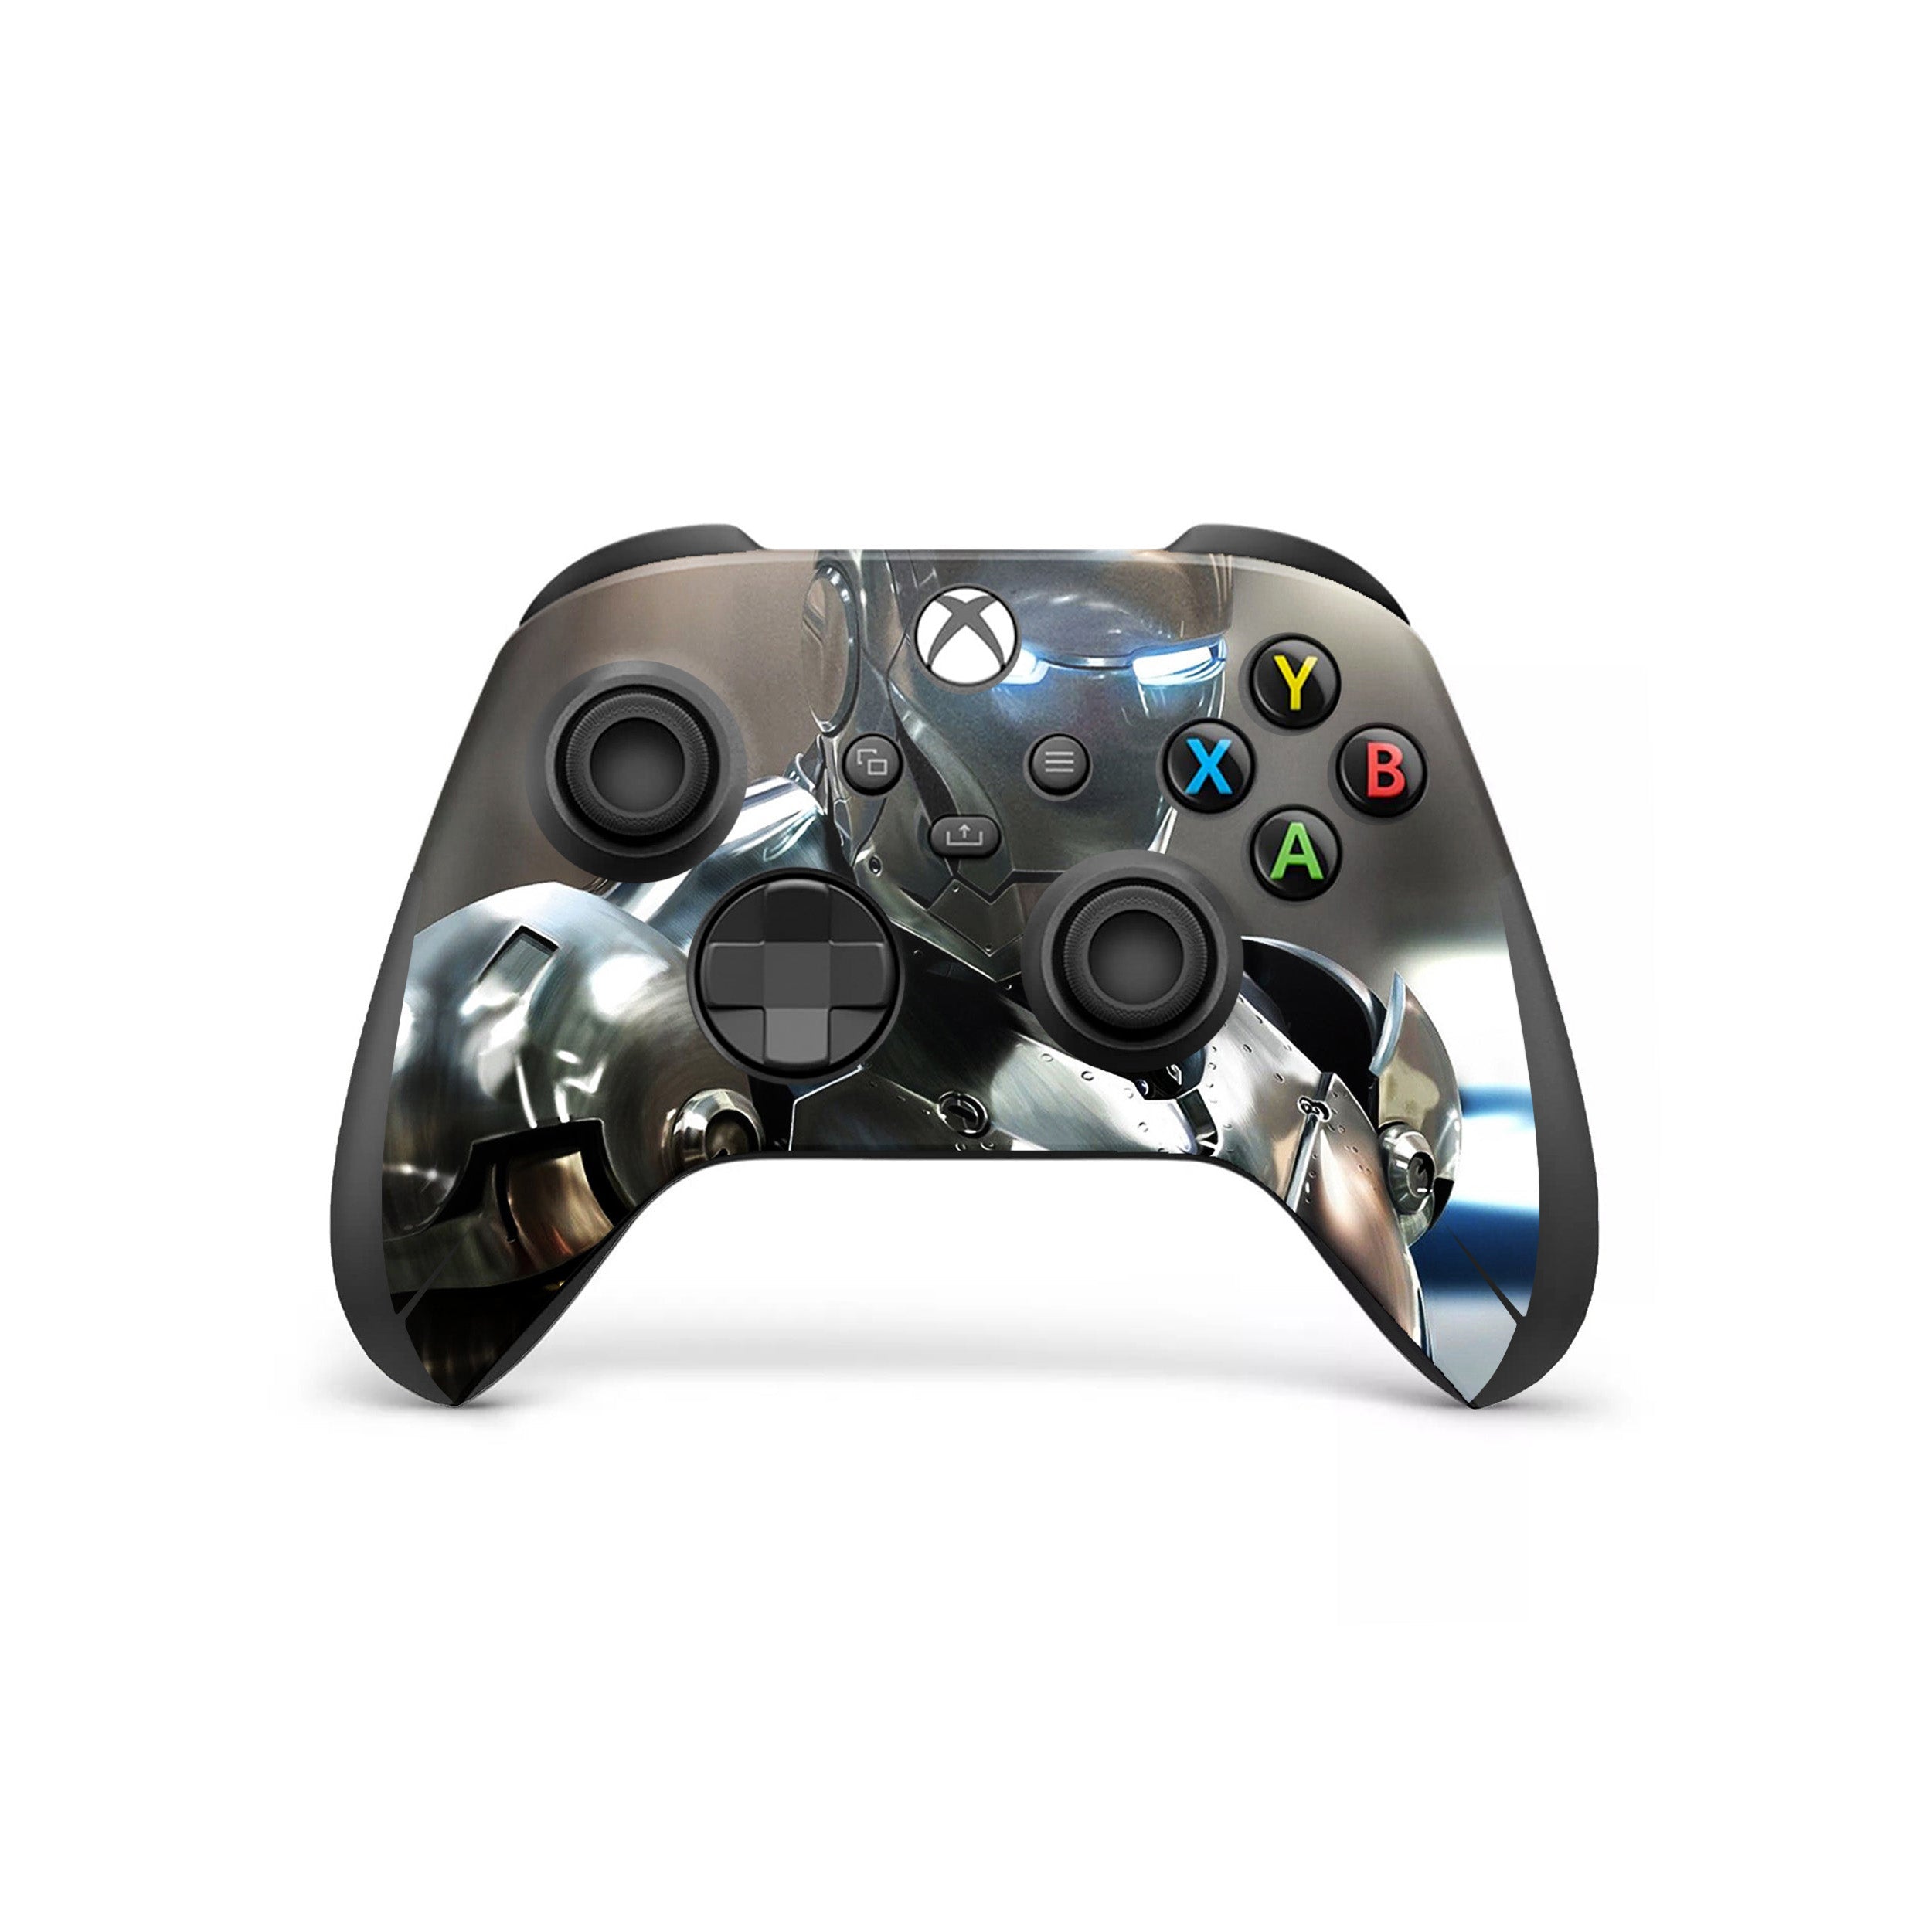 A video game skin featuring a Marvel Iron Man design for the Xbox Wireless Controller.